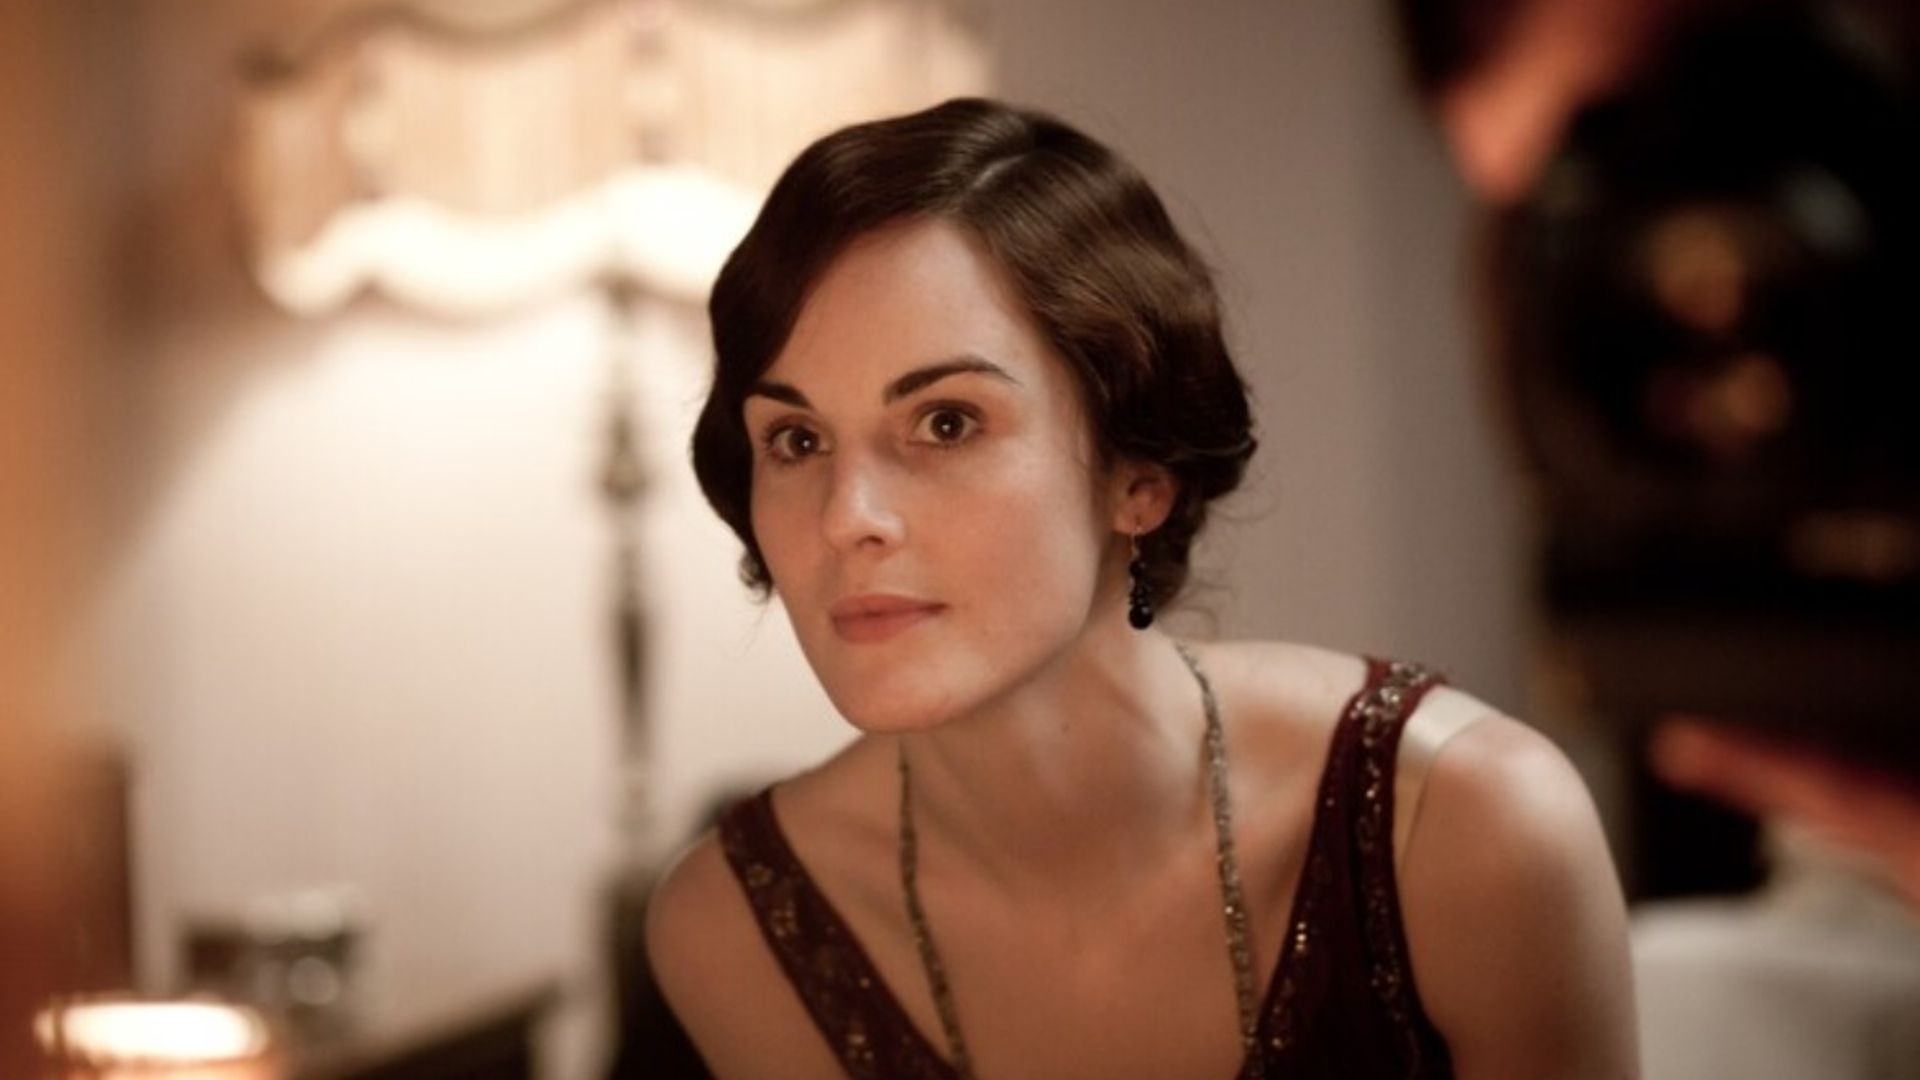 Downton Abbey’s Michelle Dockery to star in epic new thriller from Peaky Blinders creator